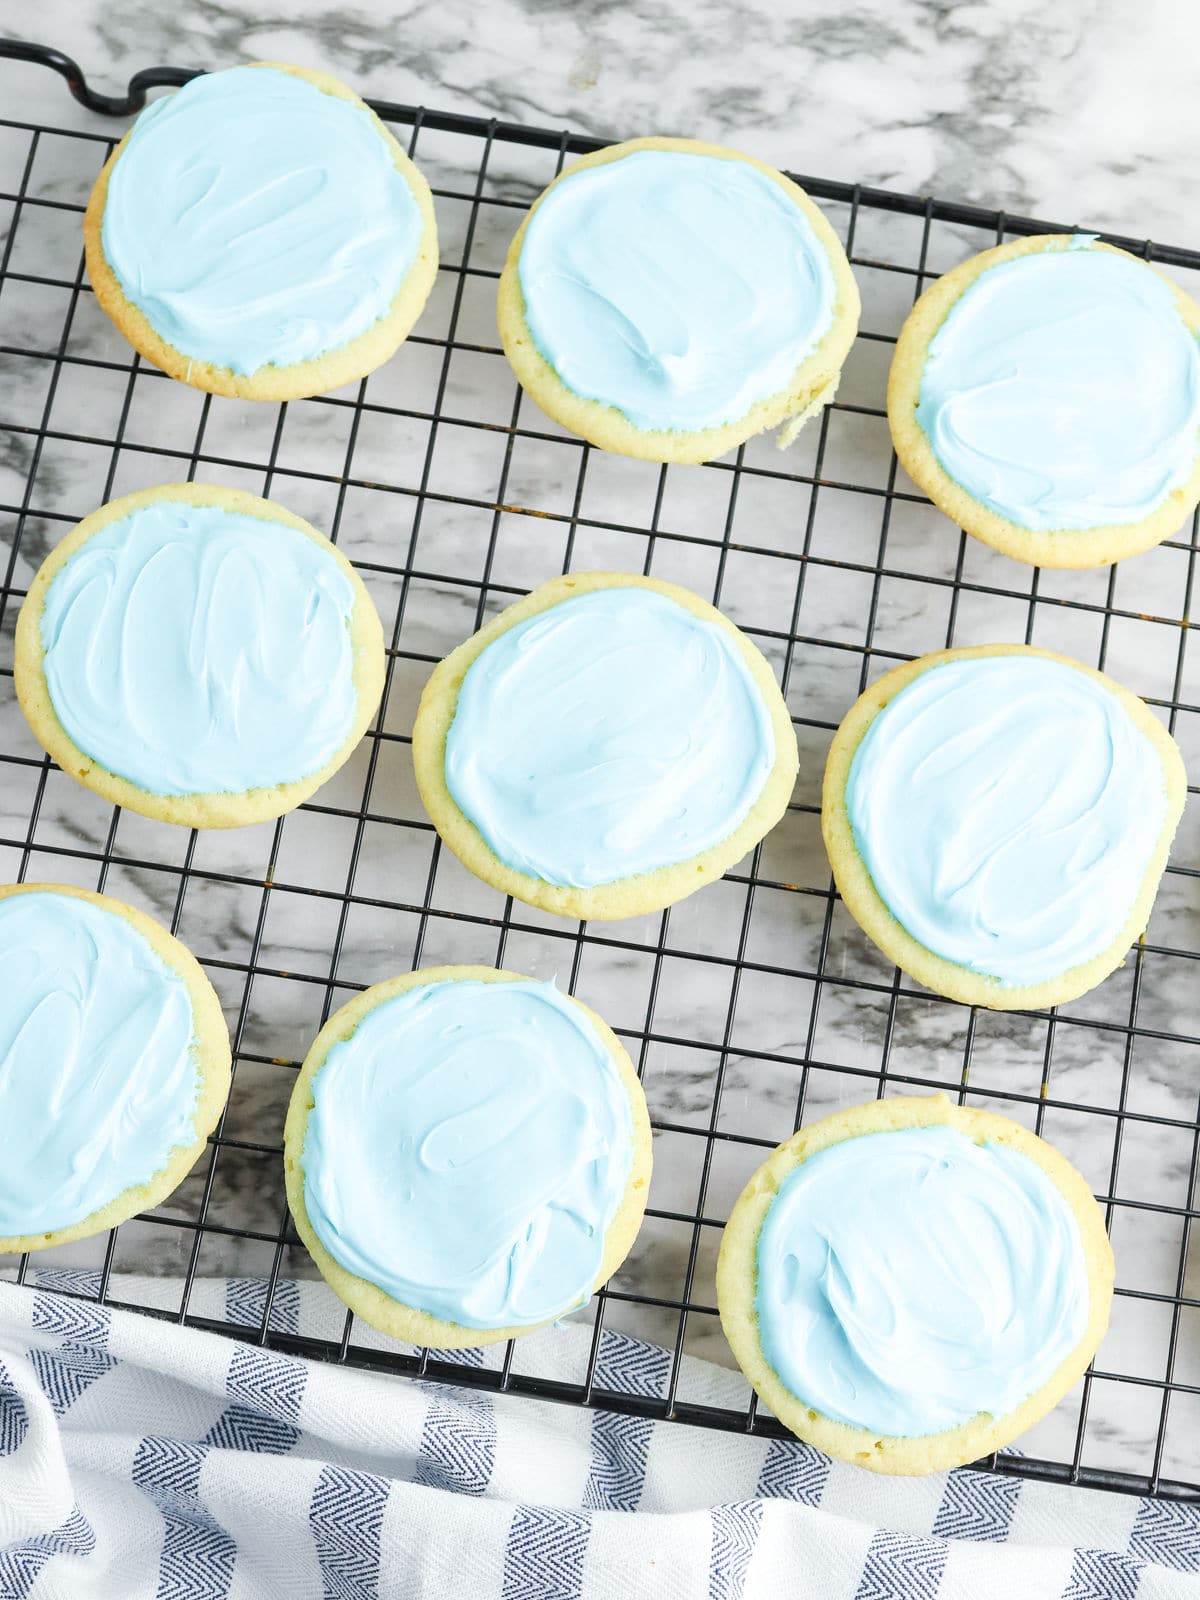 Cookies with blue icing on a cooling rack.